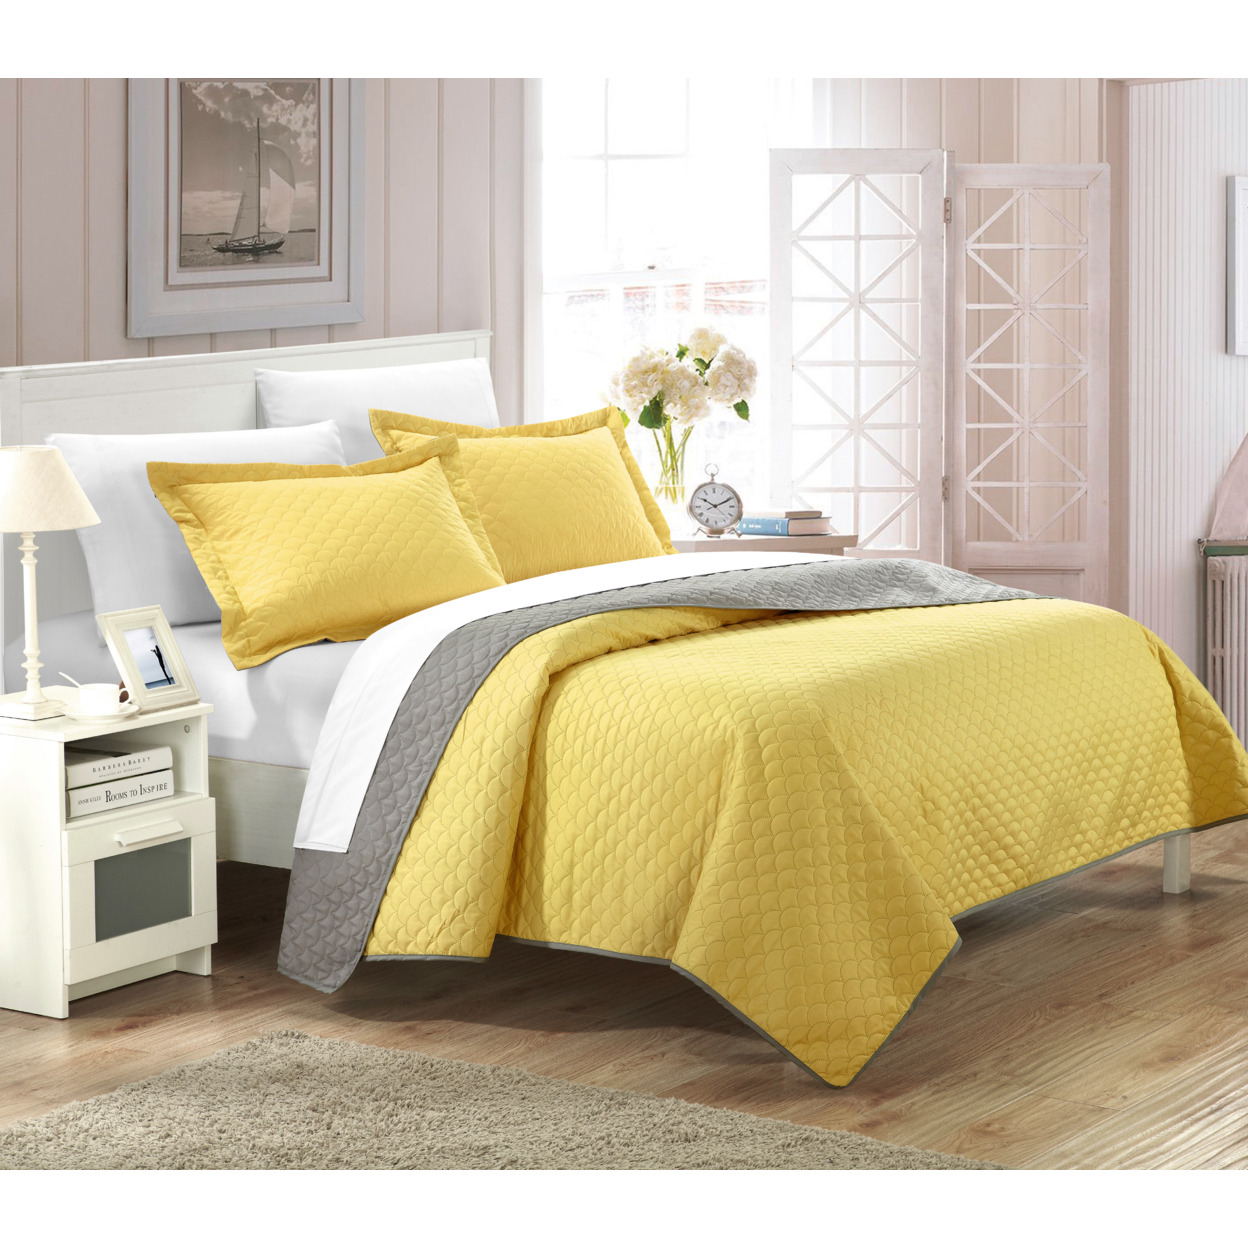 Lugano Reversible Color Block Modern Design Quilt With Shams Set - Yellow, King